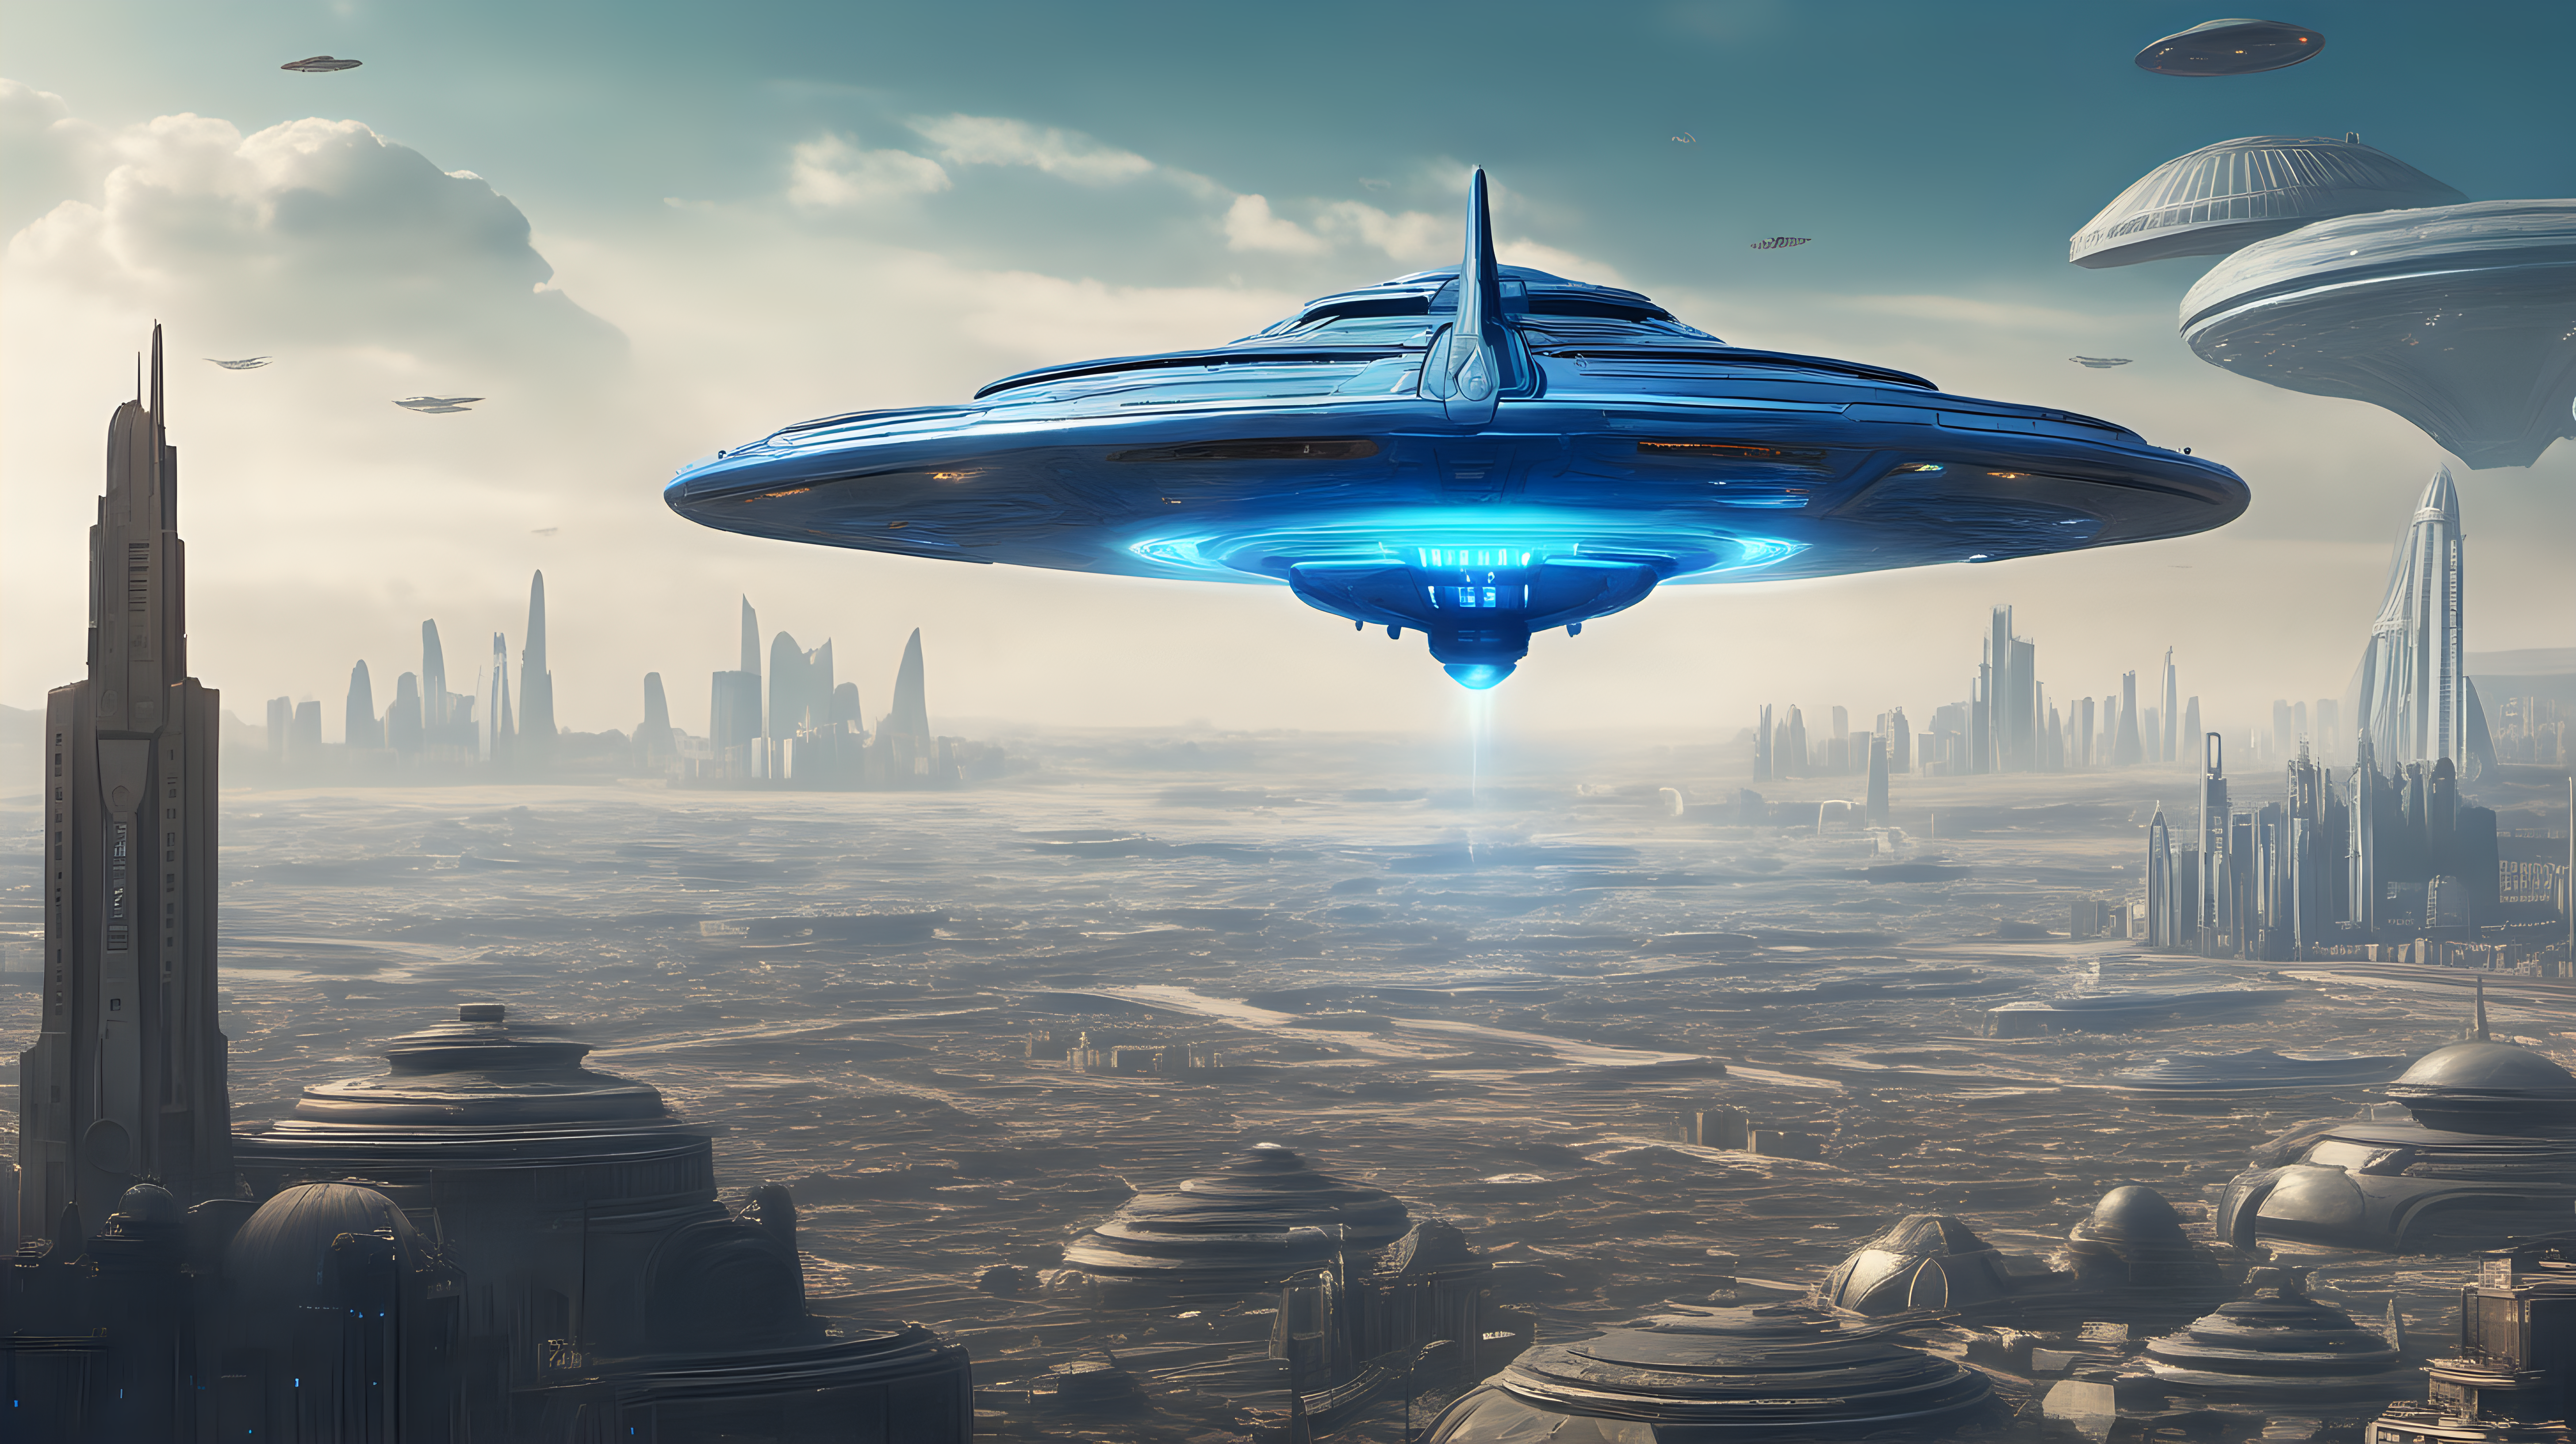 A blue alien spacecraft hovering in the foreground